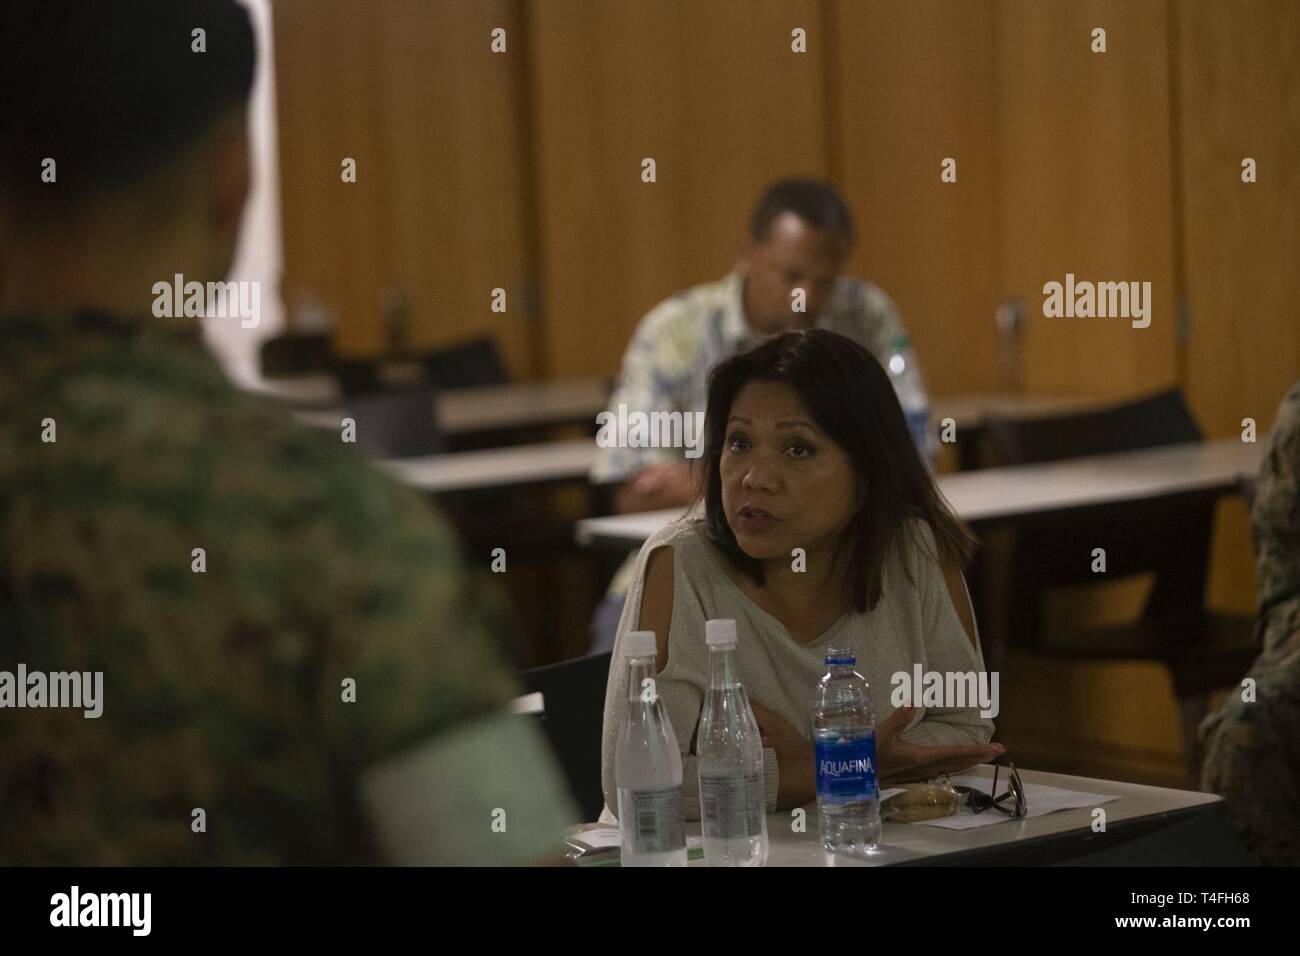 U.S. Marine Corps Col. Raul Lianez, left, commanding officer, Marine Corps Base Hawaii, speaks with Rep. Rida Arakawa, right, of Hawaii's Ewa District, Pu’uloa Range Training Facility, Marine Corps Base Hawaii (MCBH), Apr. 8, 2019.  During the visit, MCBH leadership discussed and showcased Marine Corps marksmanship training, community partnerships, and the positive economic impact from MCBH facilities and service members. Stock Photo